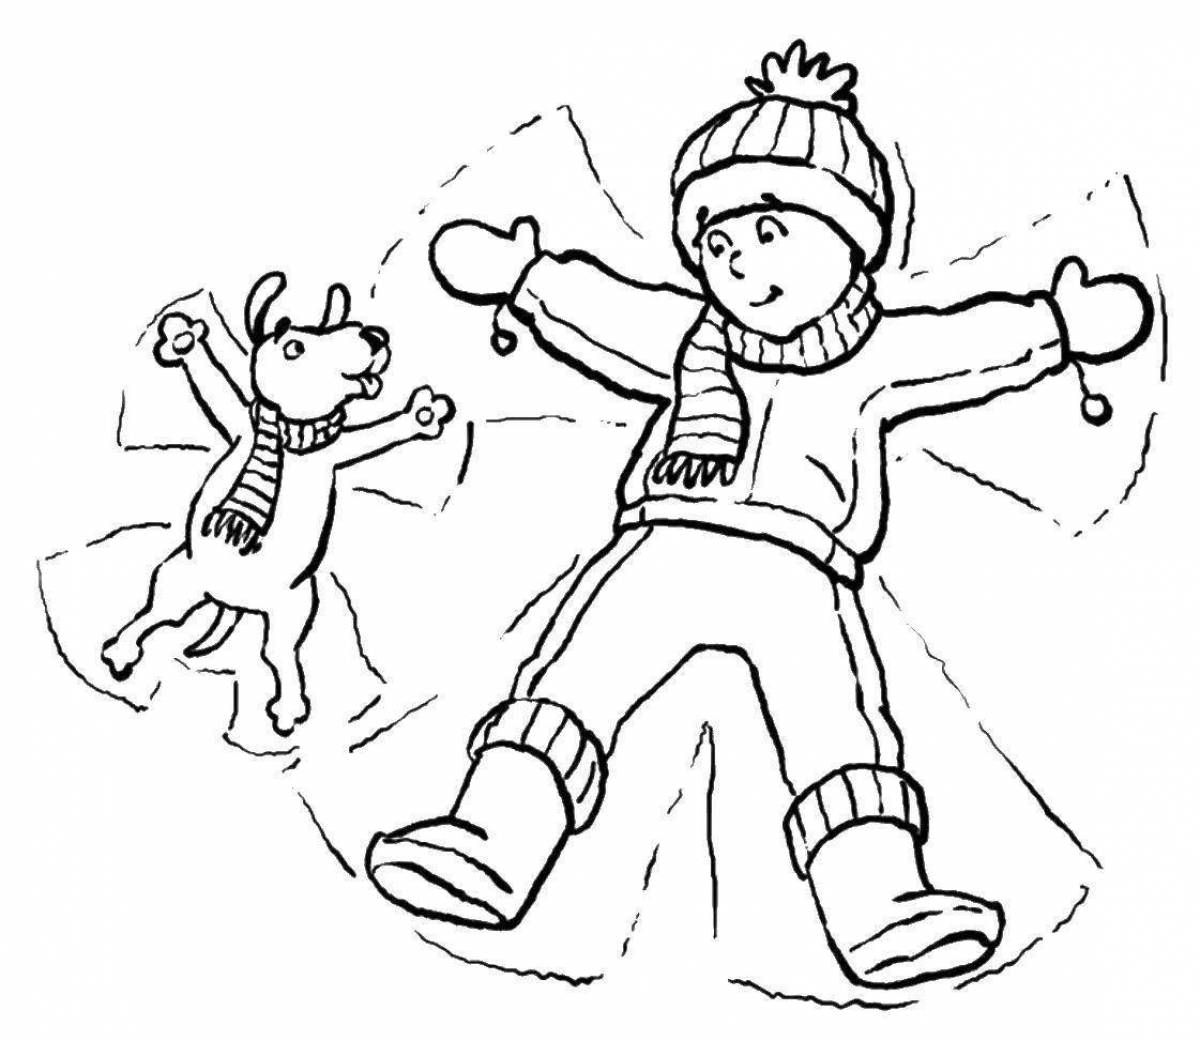 Adorable snowball fight coloring book for kids